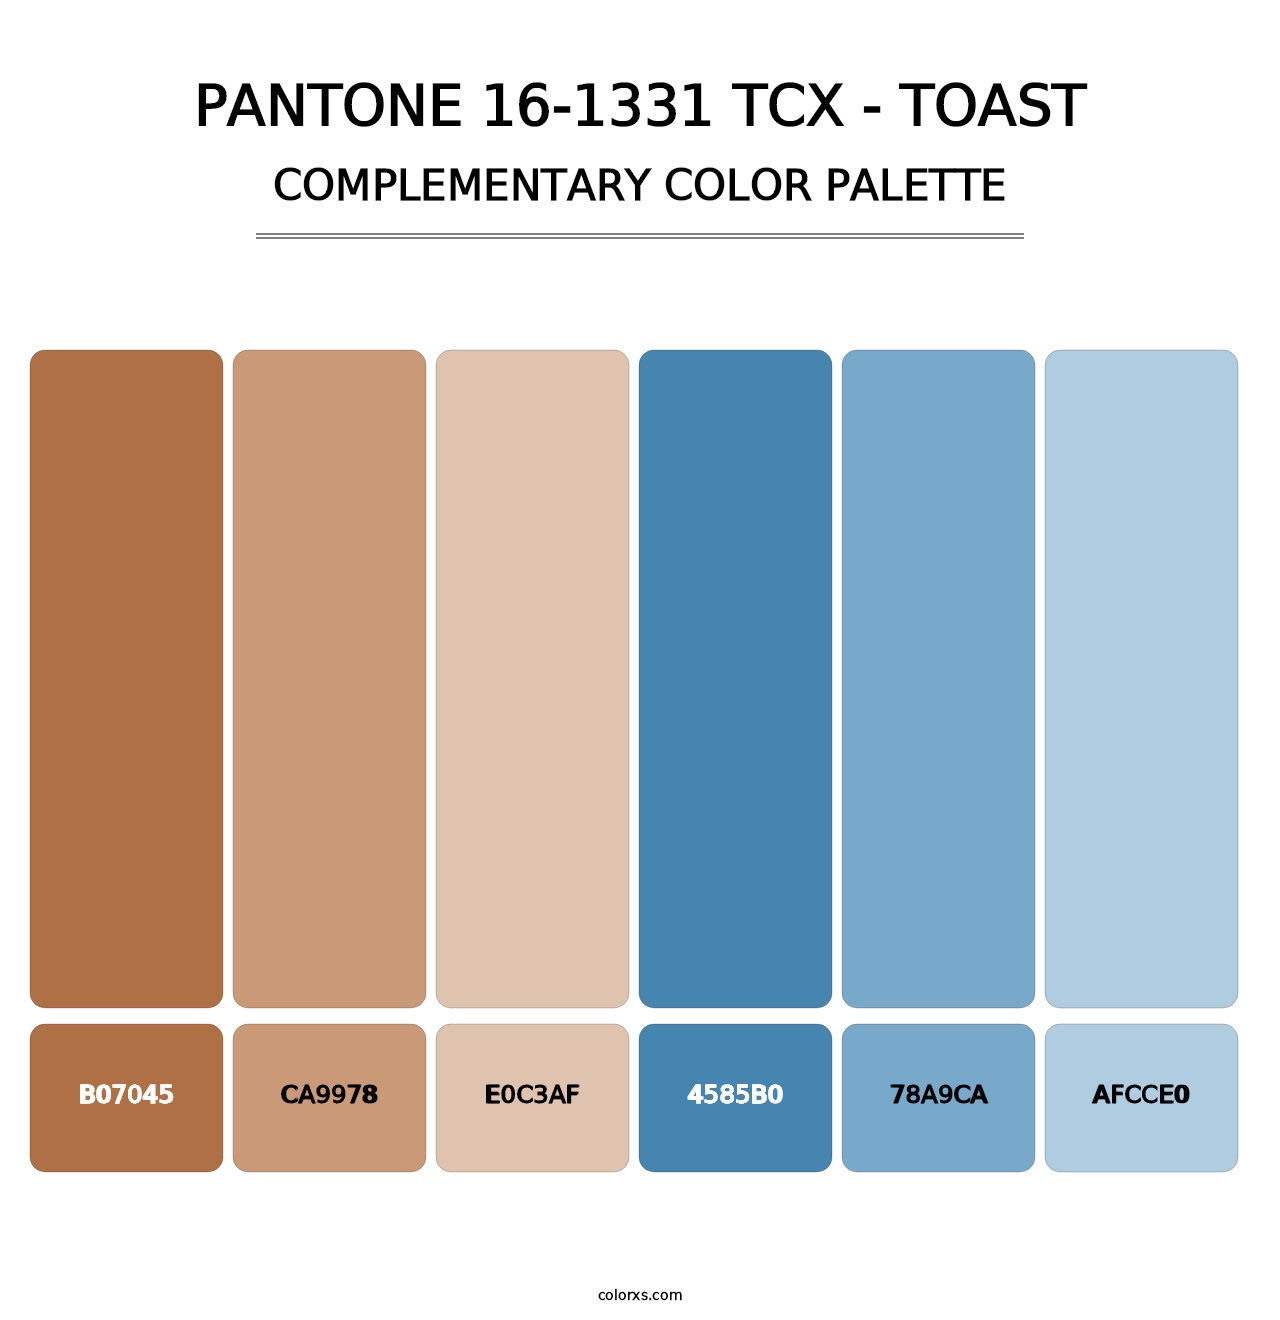 PANTONE 16-1331 TCX - Toast - Complementary Color Palette